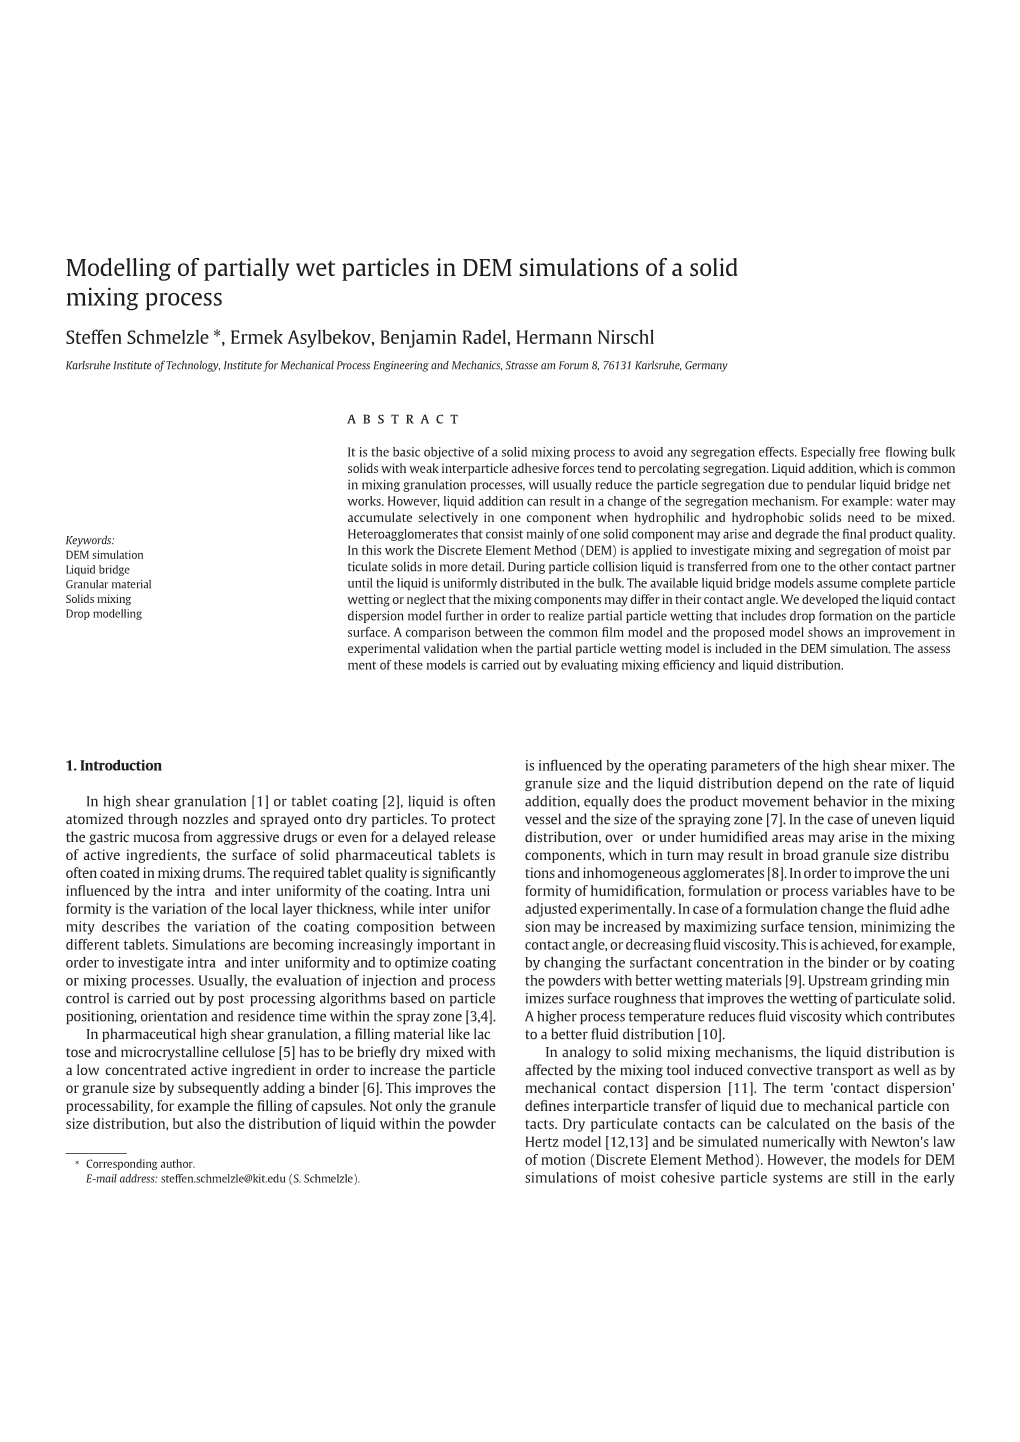 Modelling of Partially Wet Particles in DEM Simulations of a Solid Mixing Process